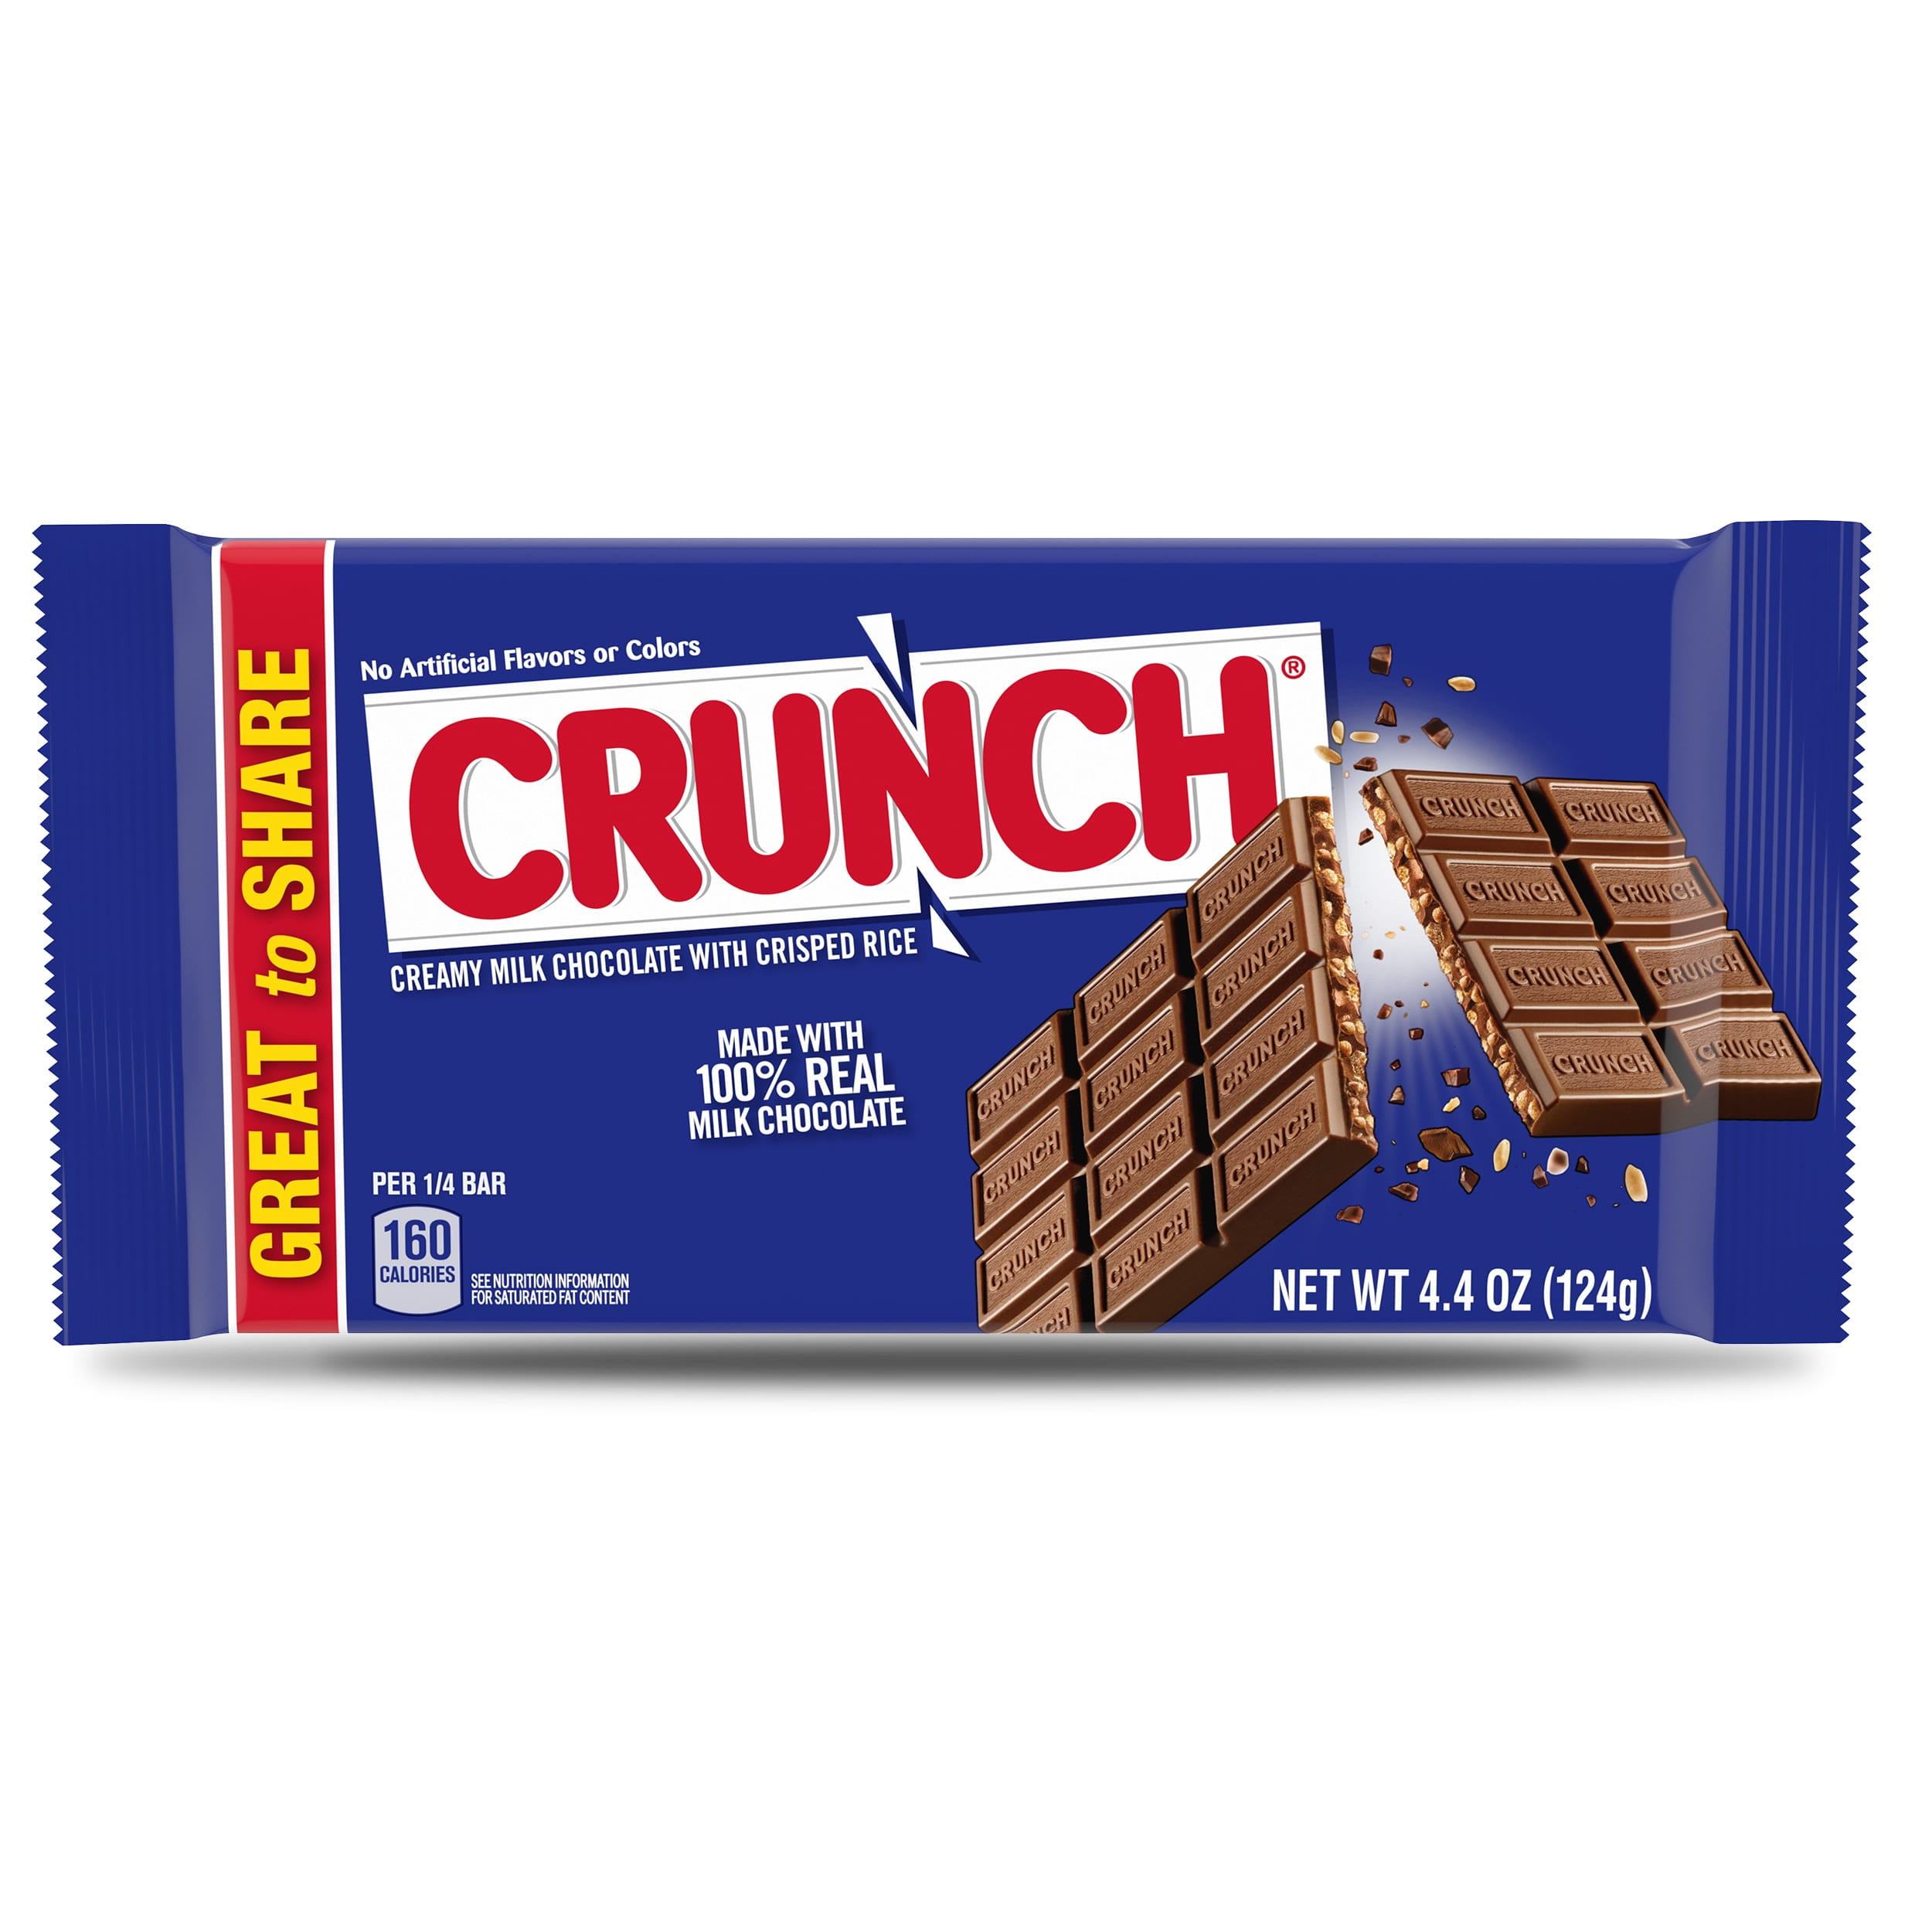 CRUNCH Milk Chocolate and Crisped Rice, Full Size Candy Bar, Easter Basket Stuffers, 4.4 oz